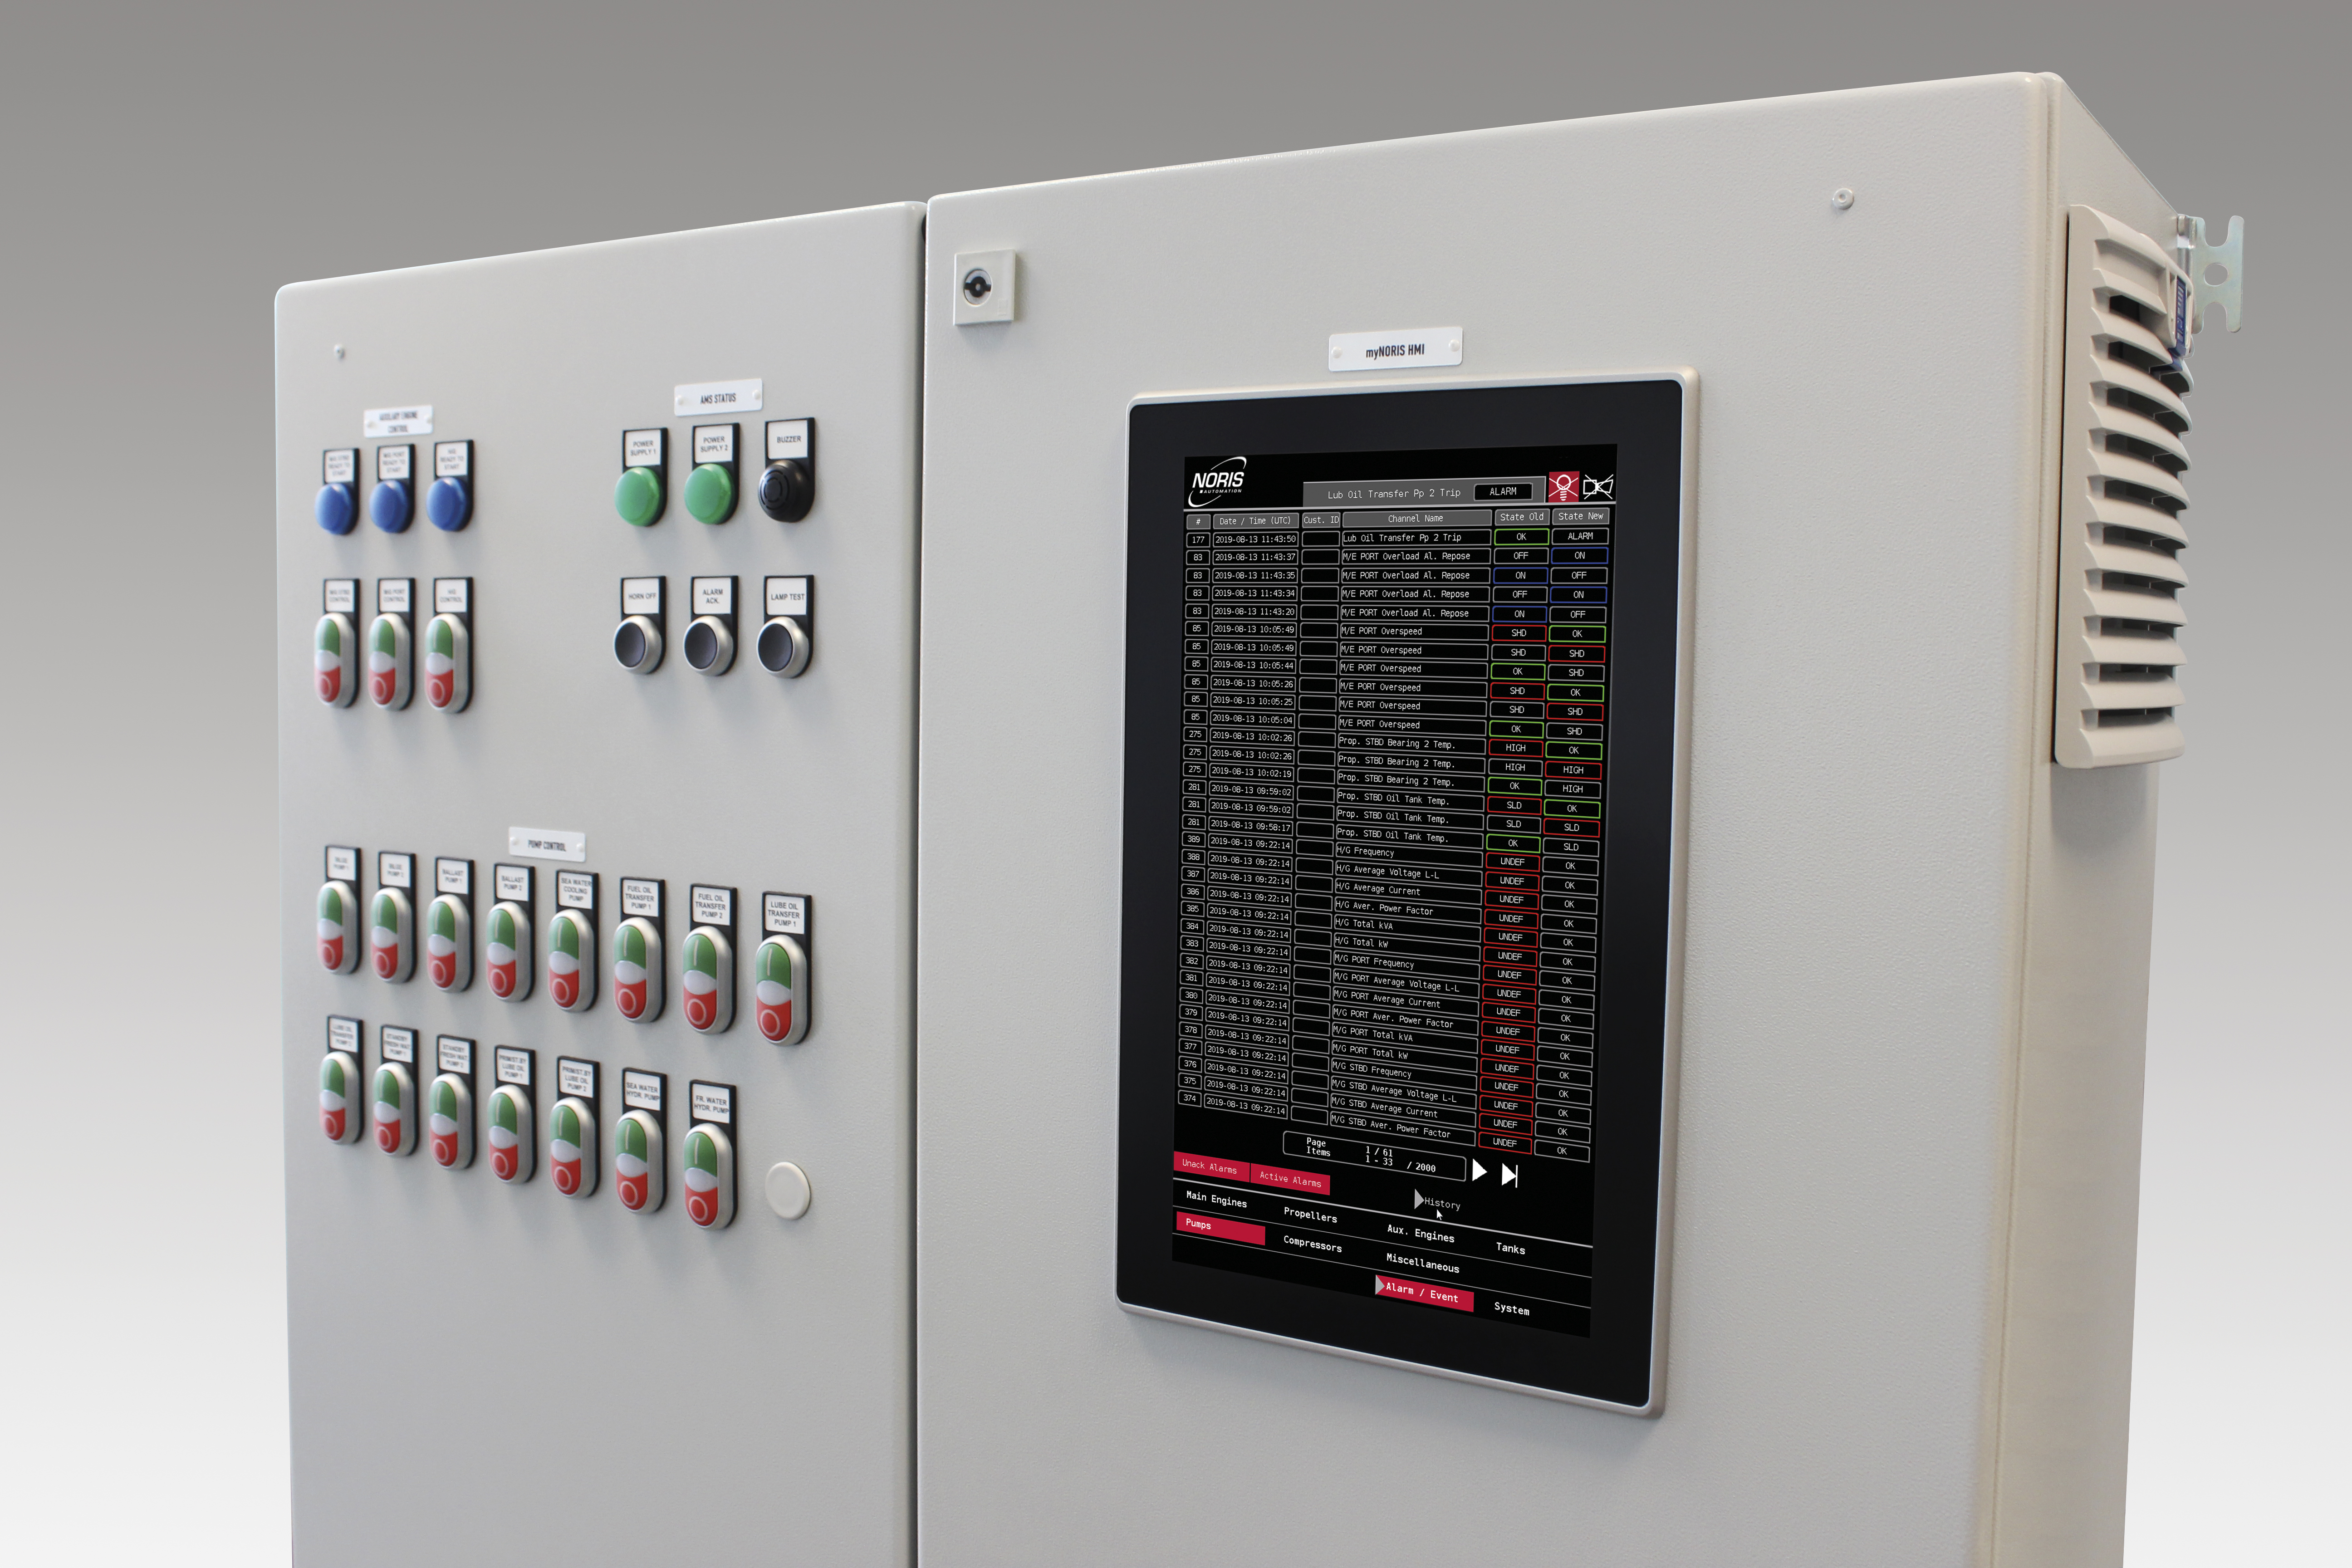 The image show the myNoris automation solution for local applications. It consists of a switch cabinet with integrated touchscreen display and push buttons and signal lamps for engine or gearbox monitoring and control.